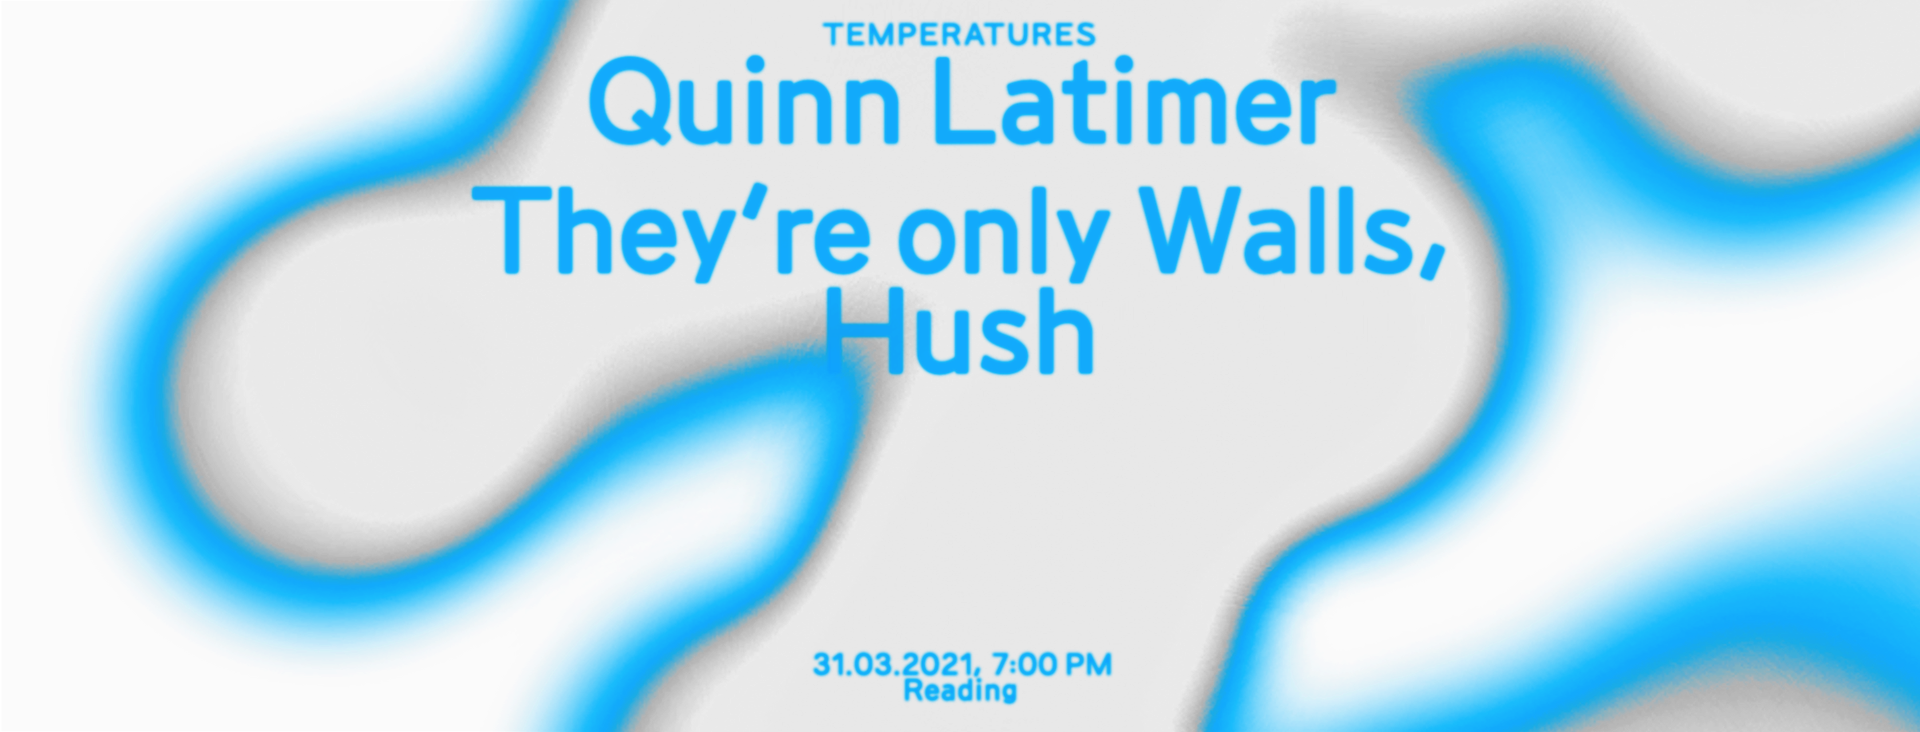 Temperatures II: Quinn Latimer – They're only Walls, Hush